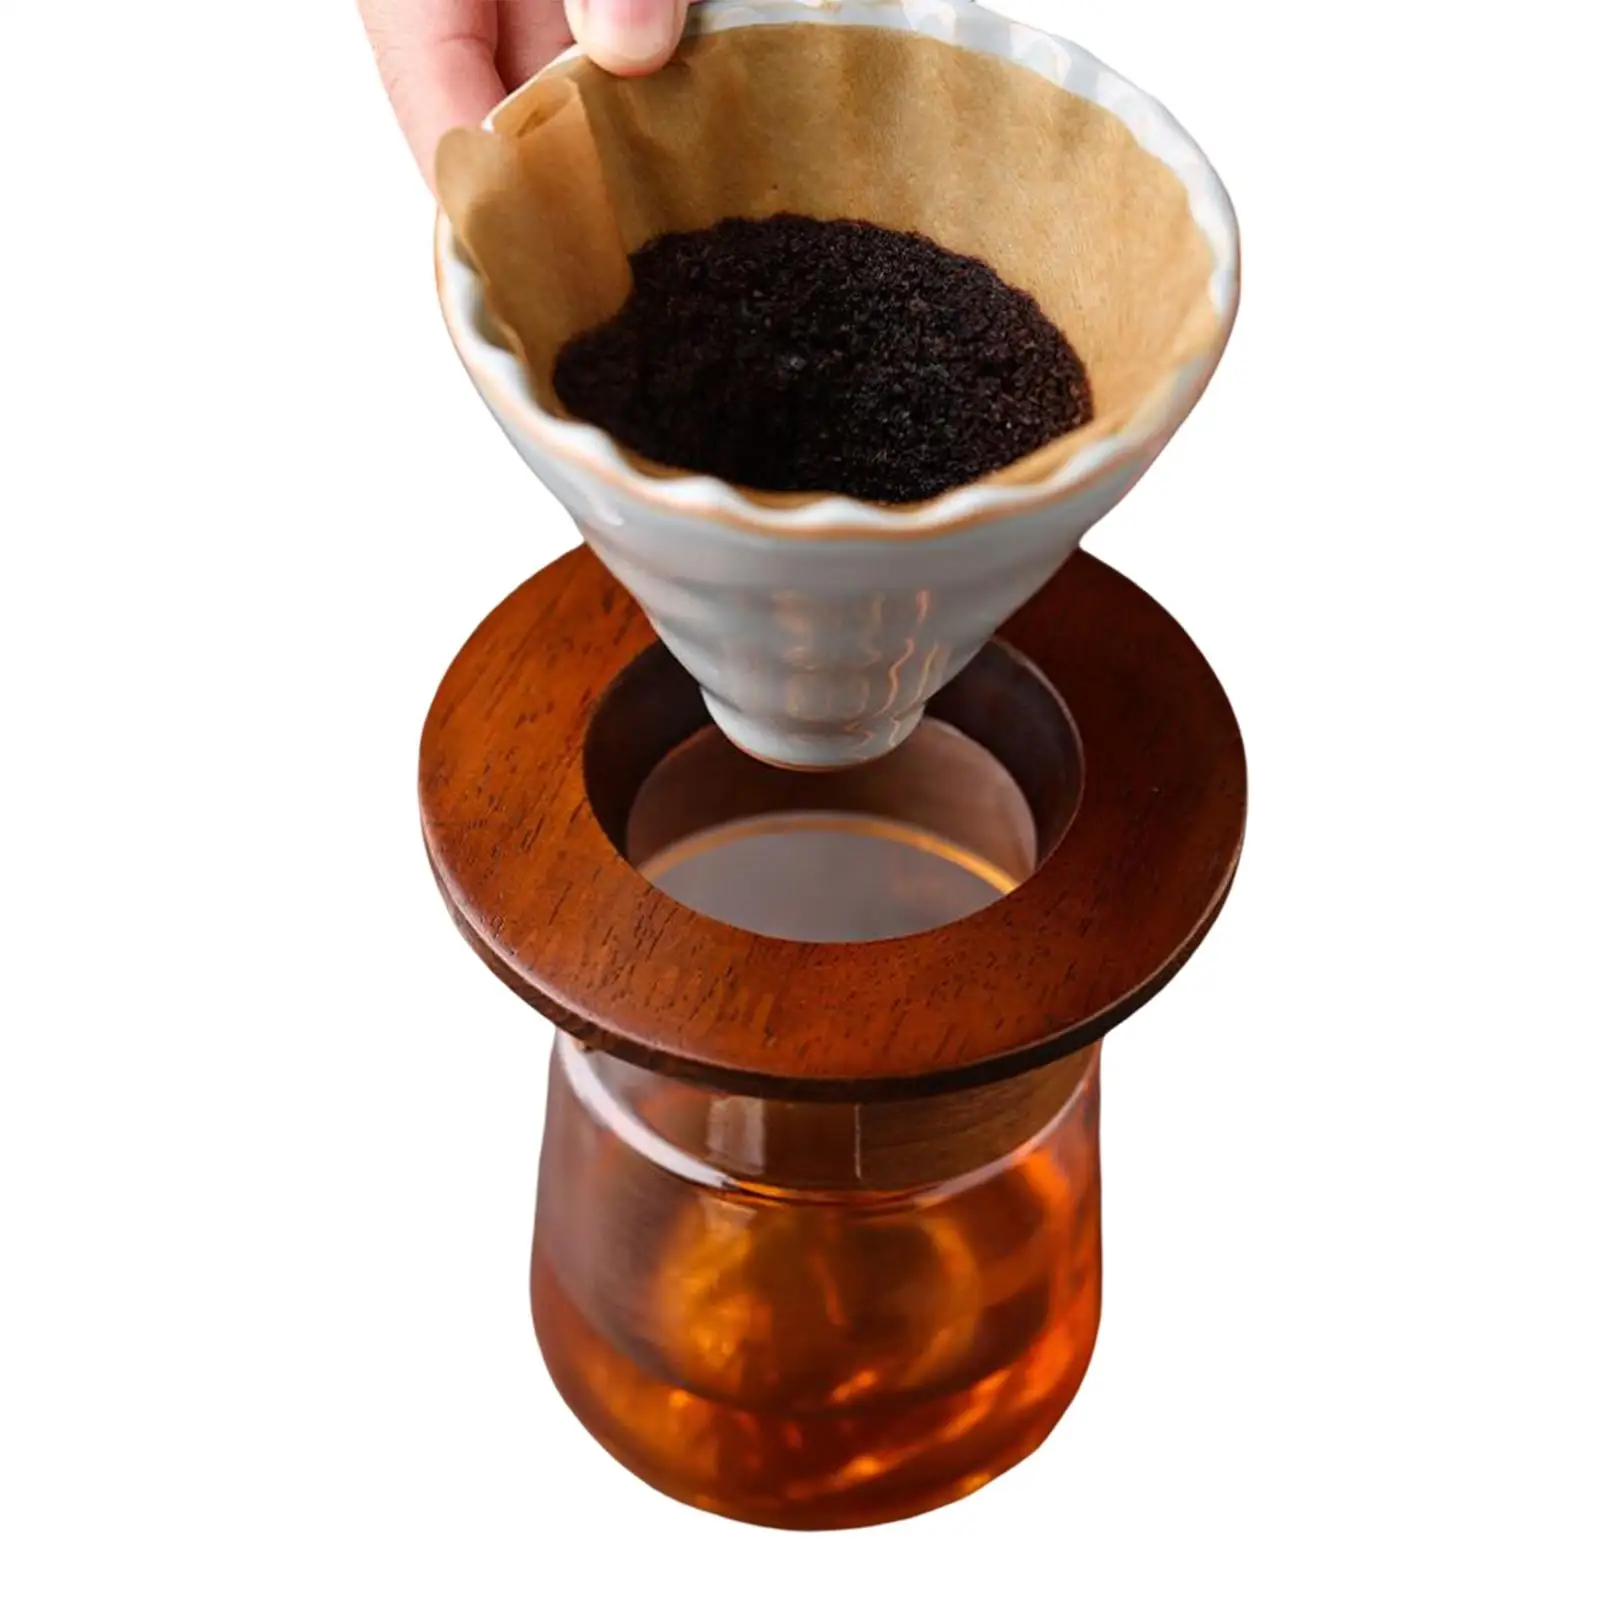 Wood Coffee Dripper Stand Gift Manual coffee Manual Accessory Pour Over Drip Holder Coffee Station Wood Base for Home Outdoor